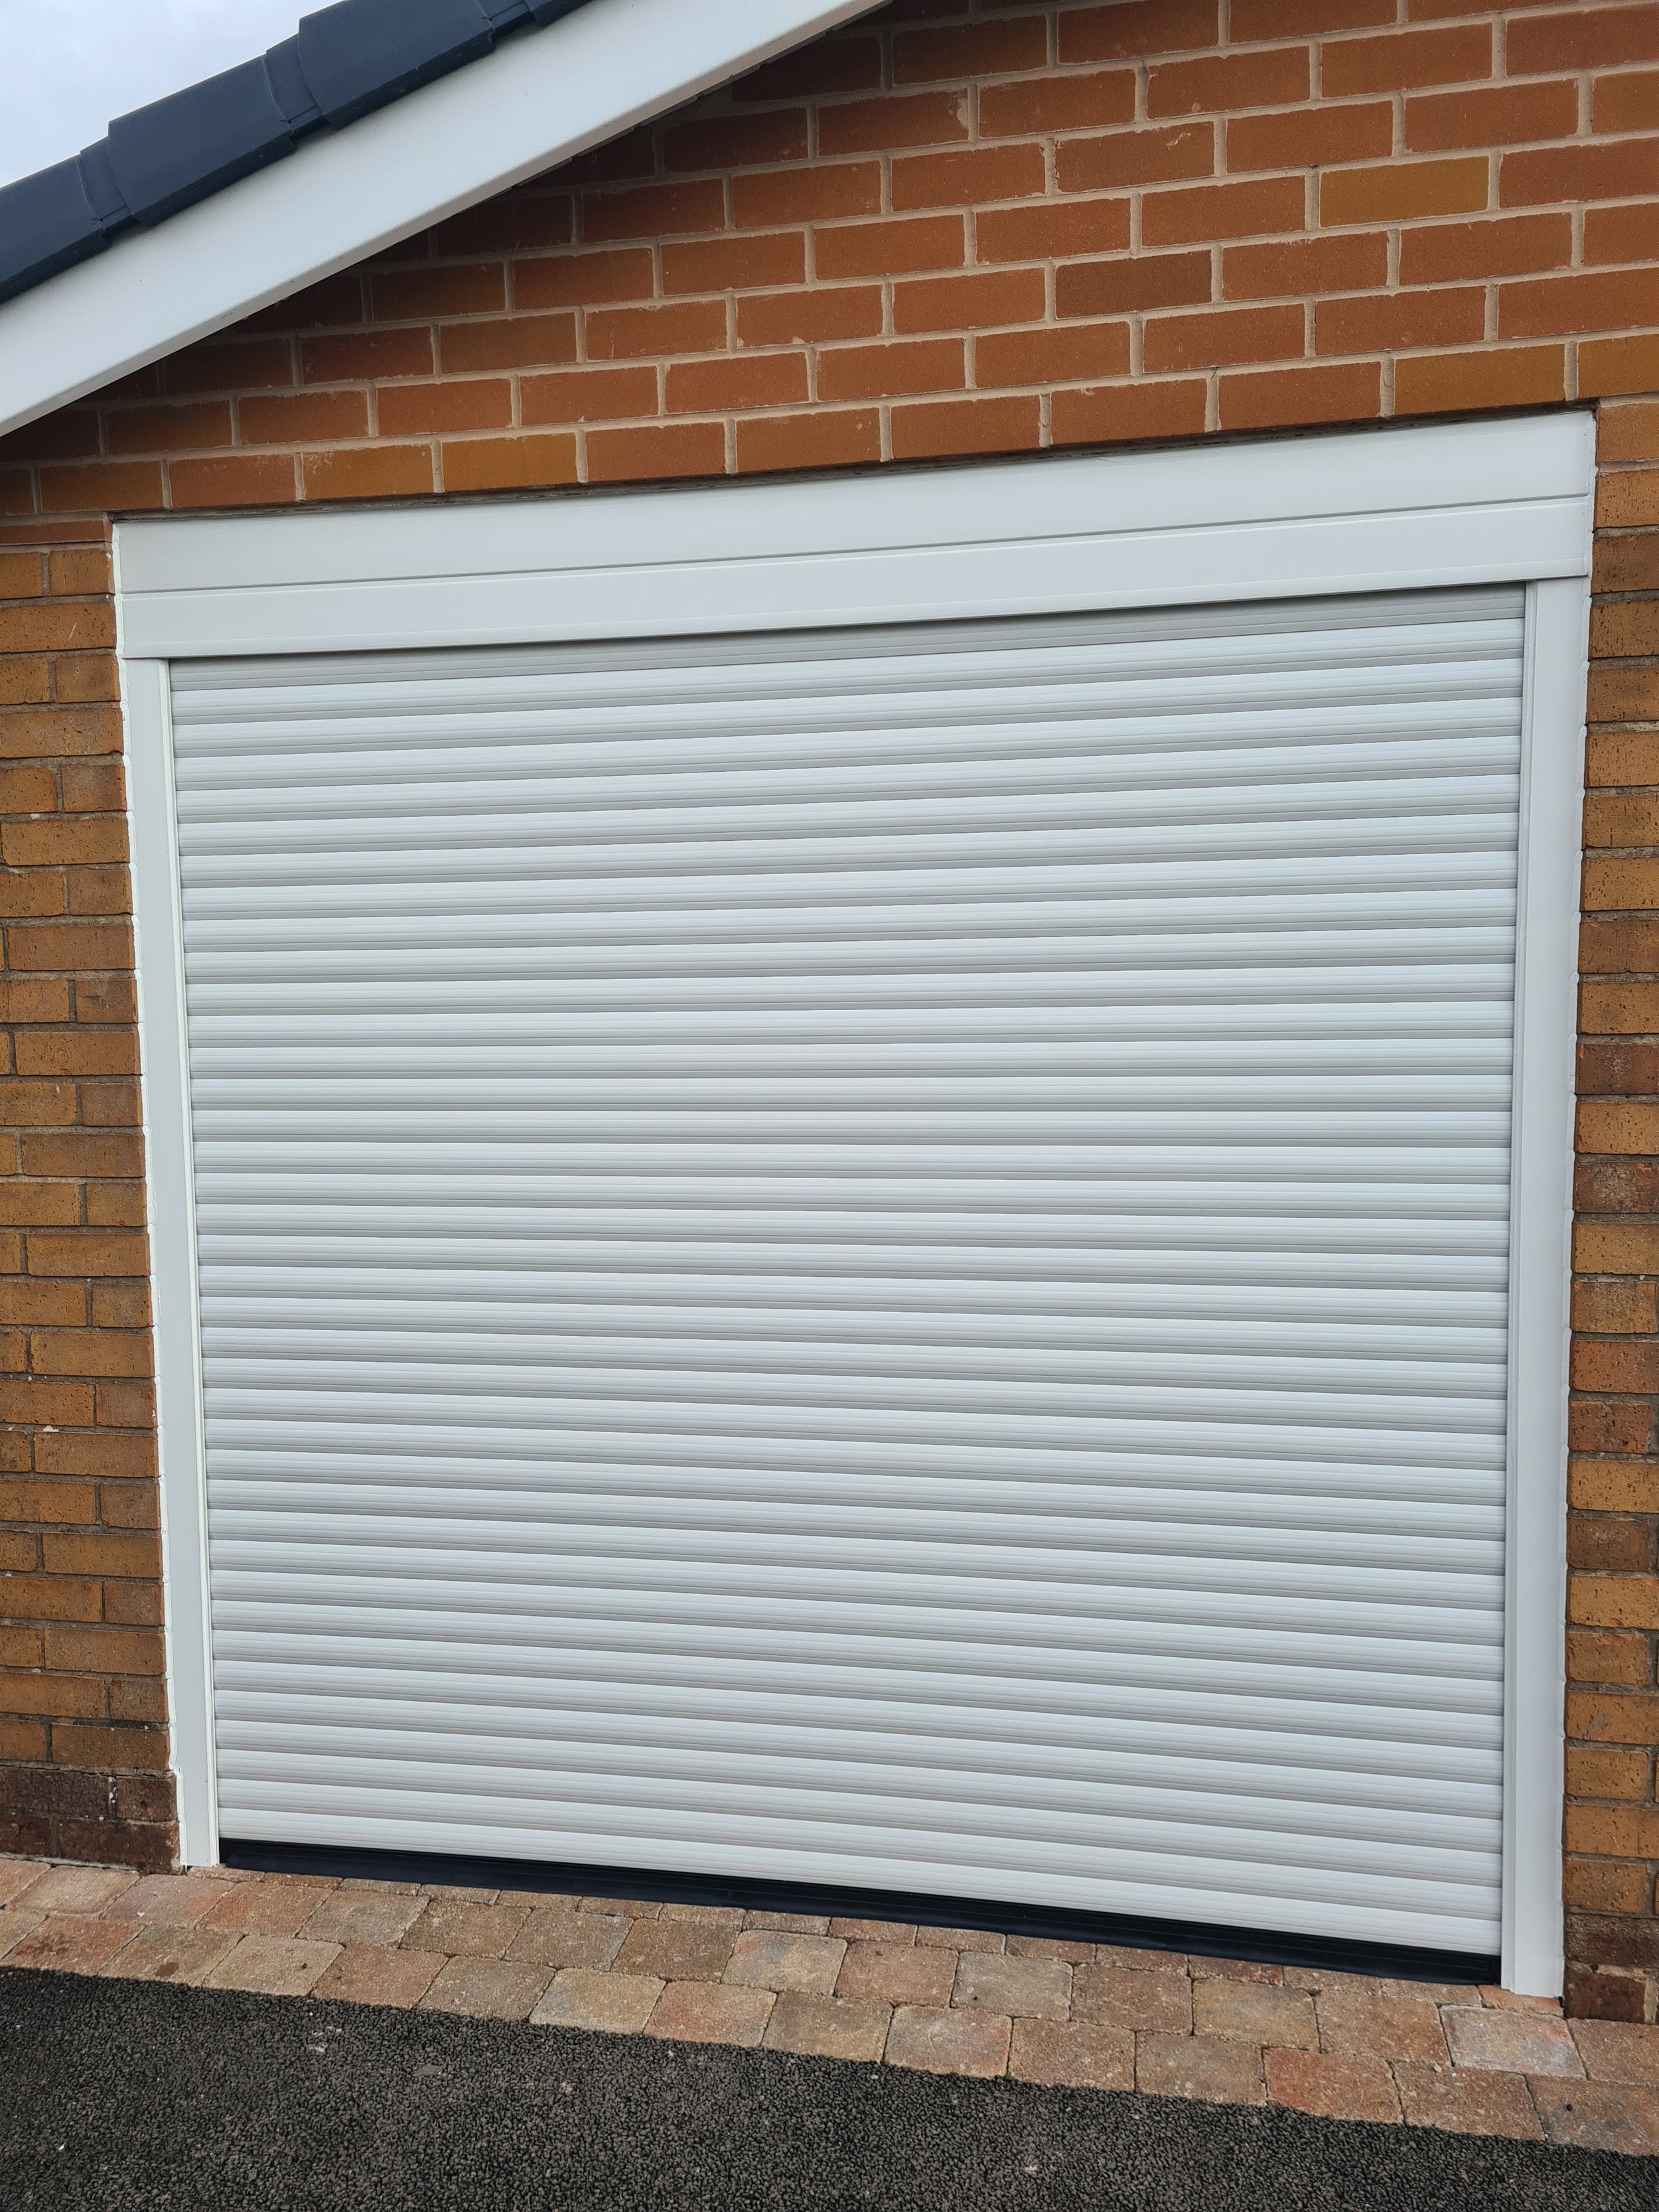 Uk Doors Midlands Classic 77m fully insulated roller garage door in smooth White W/ matching frame